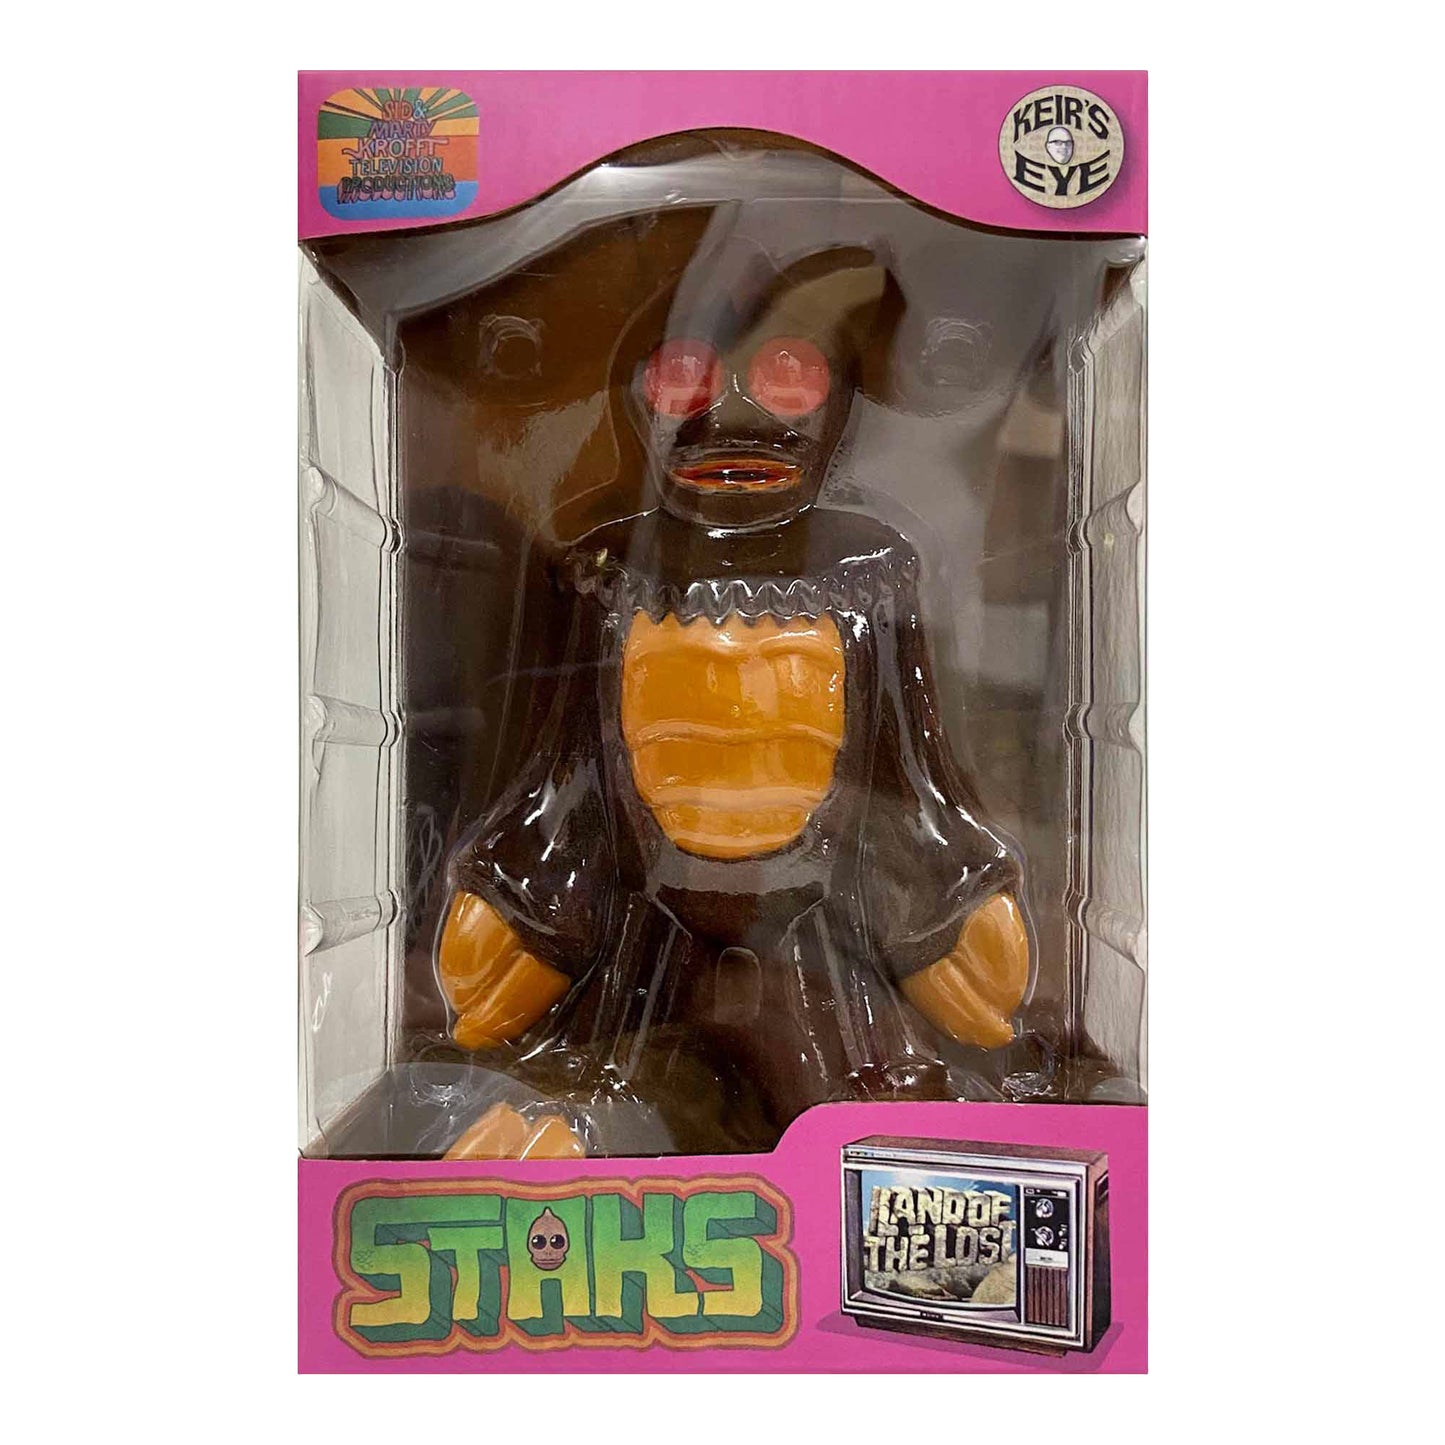 Sid and Marty Krofft x Keirs Eye: Land of the Lost - Staks Sleestak Flocked 6" Tall Vinyl Figure